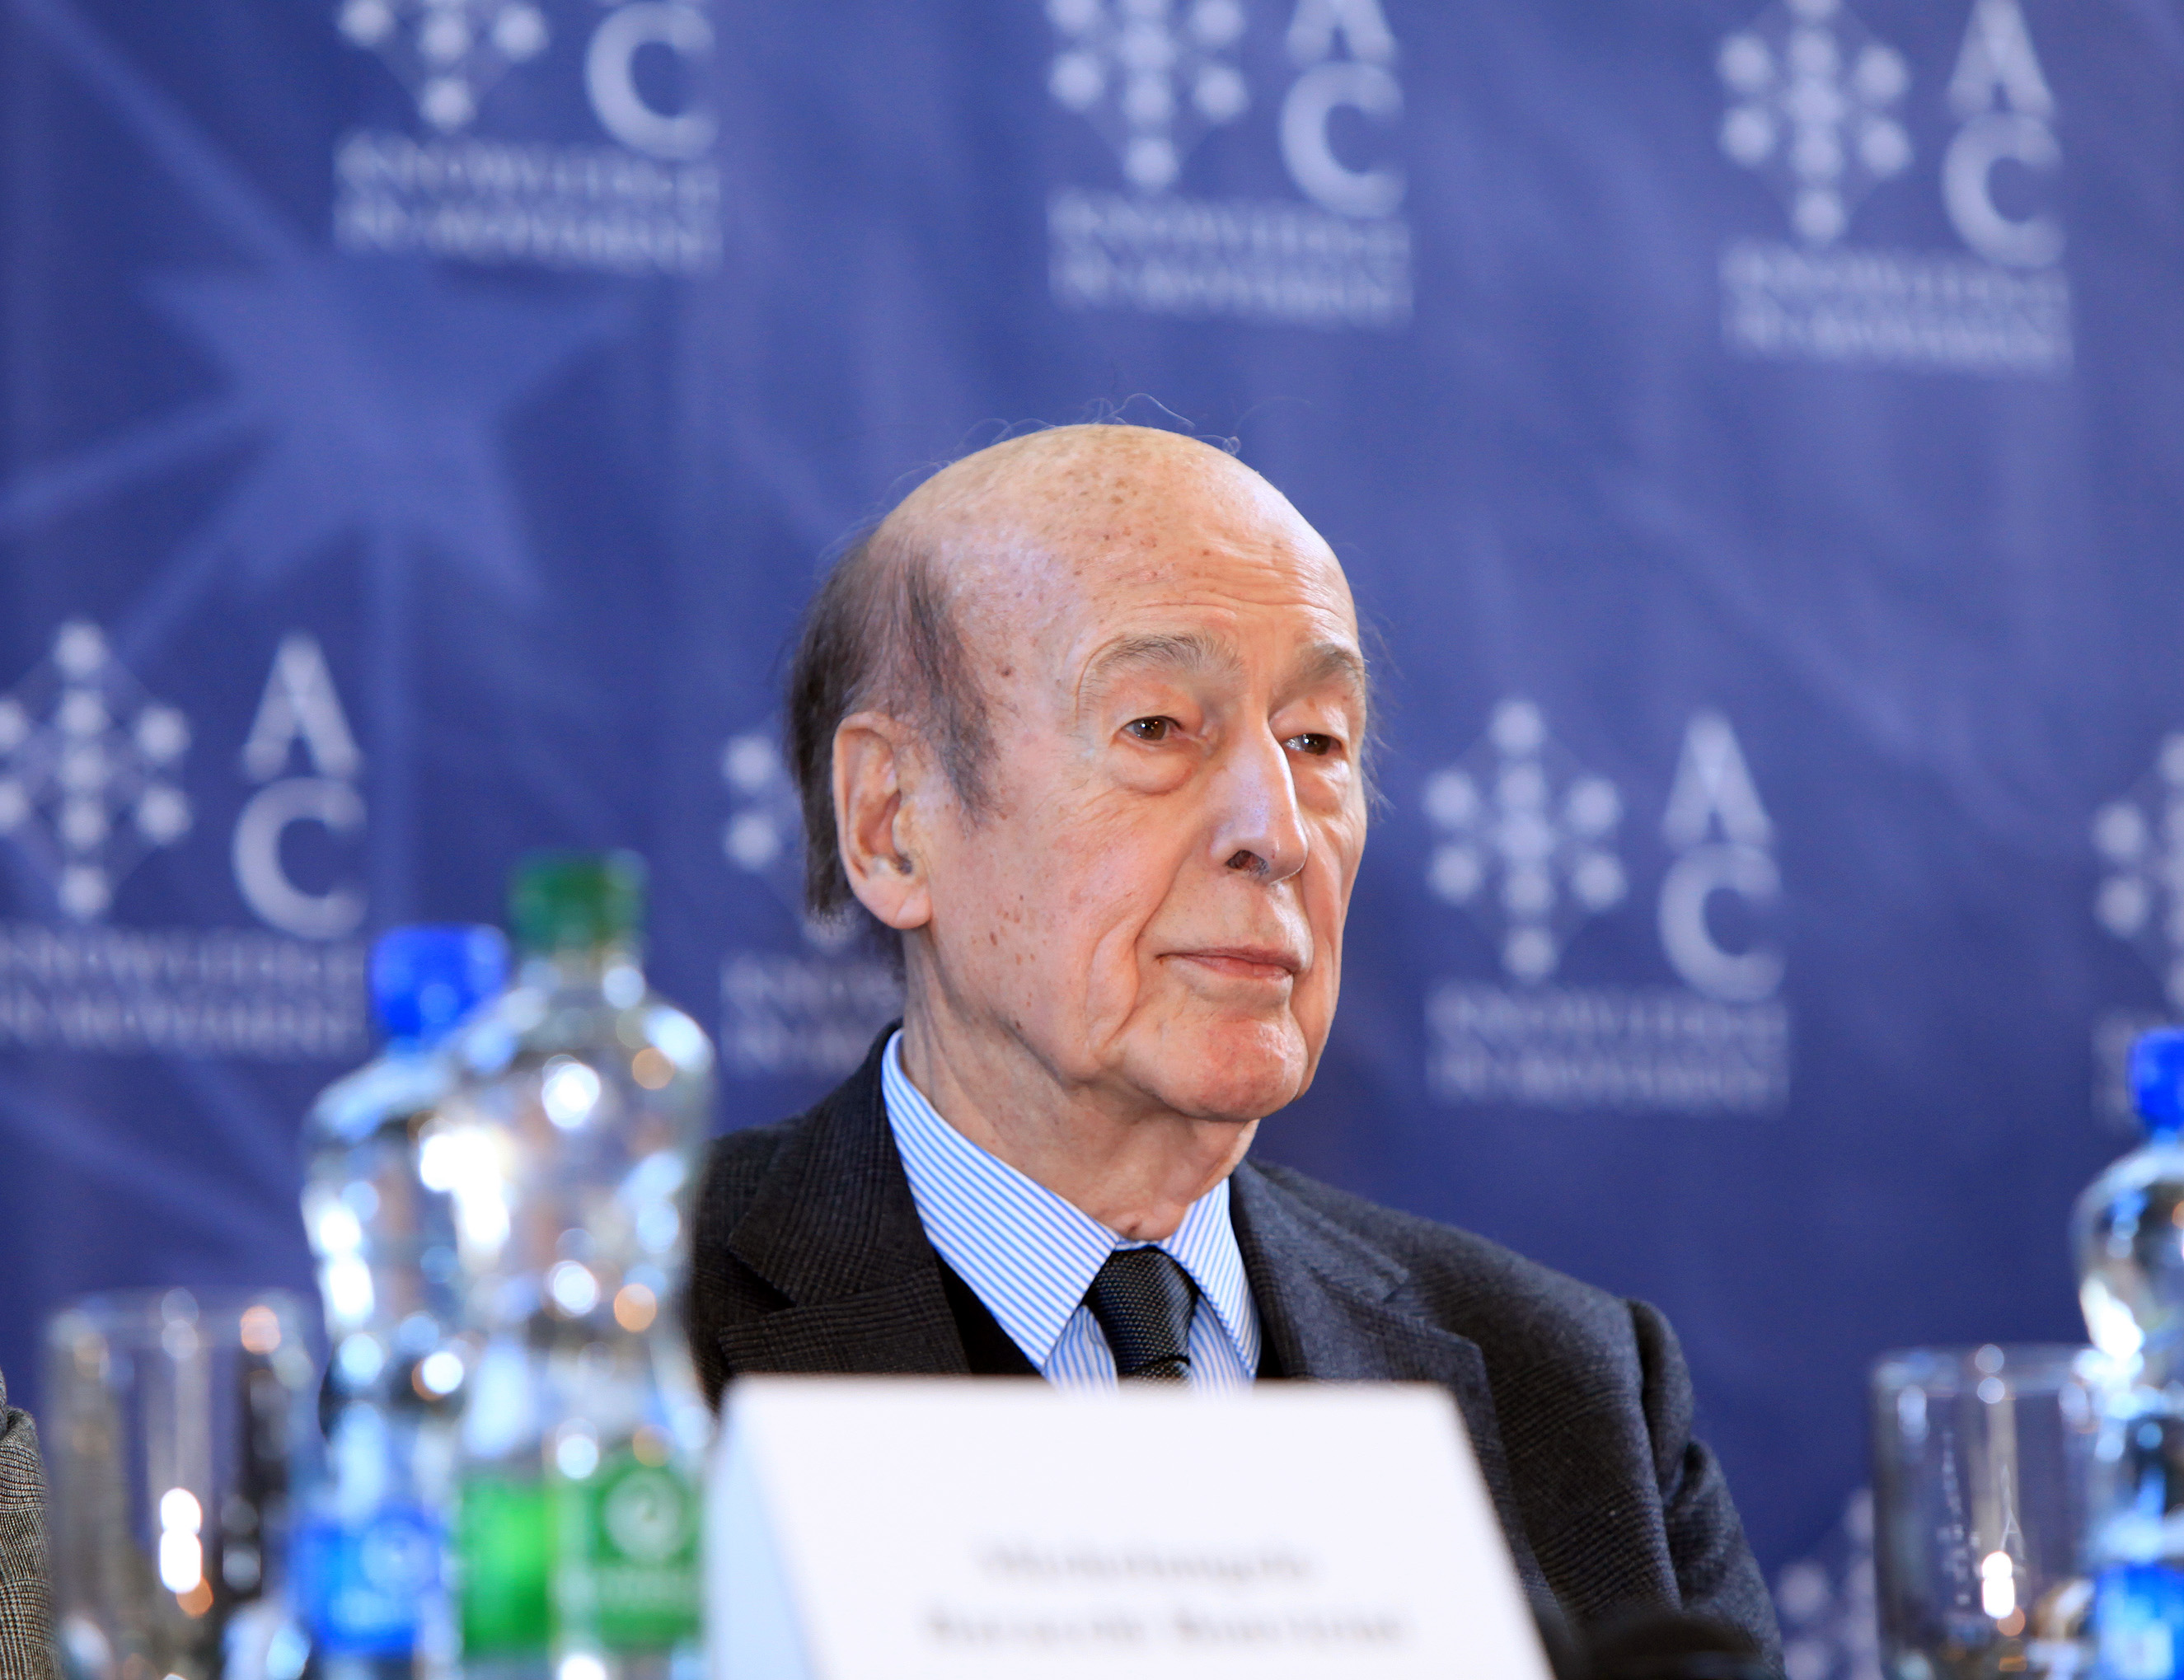 Mr. Valéry Giscard d'Estaing, Honorary President of Atomium Culture.